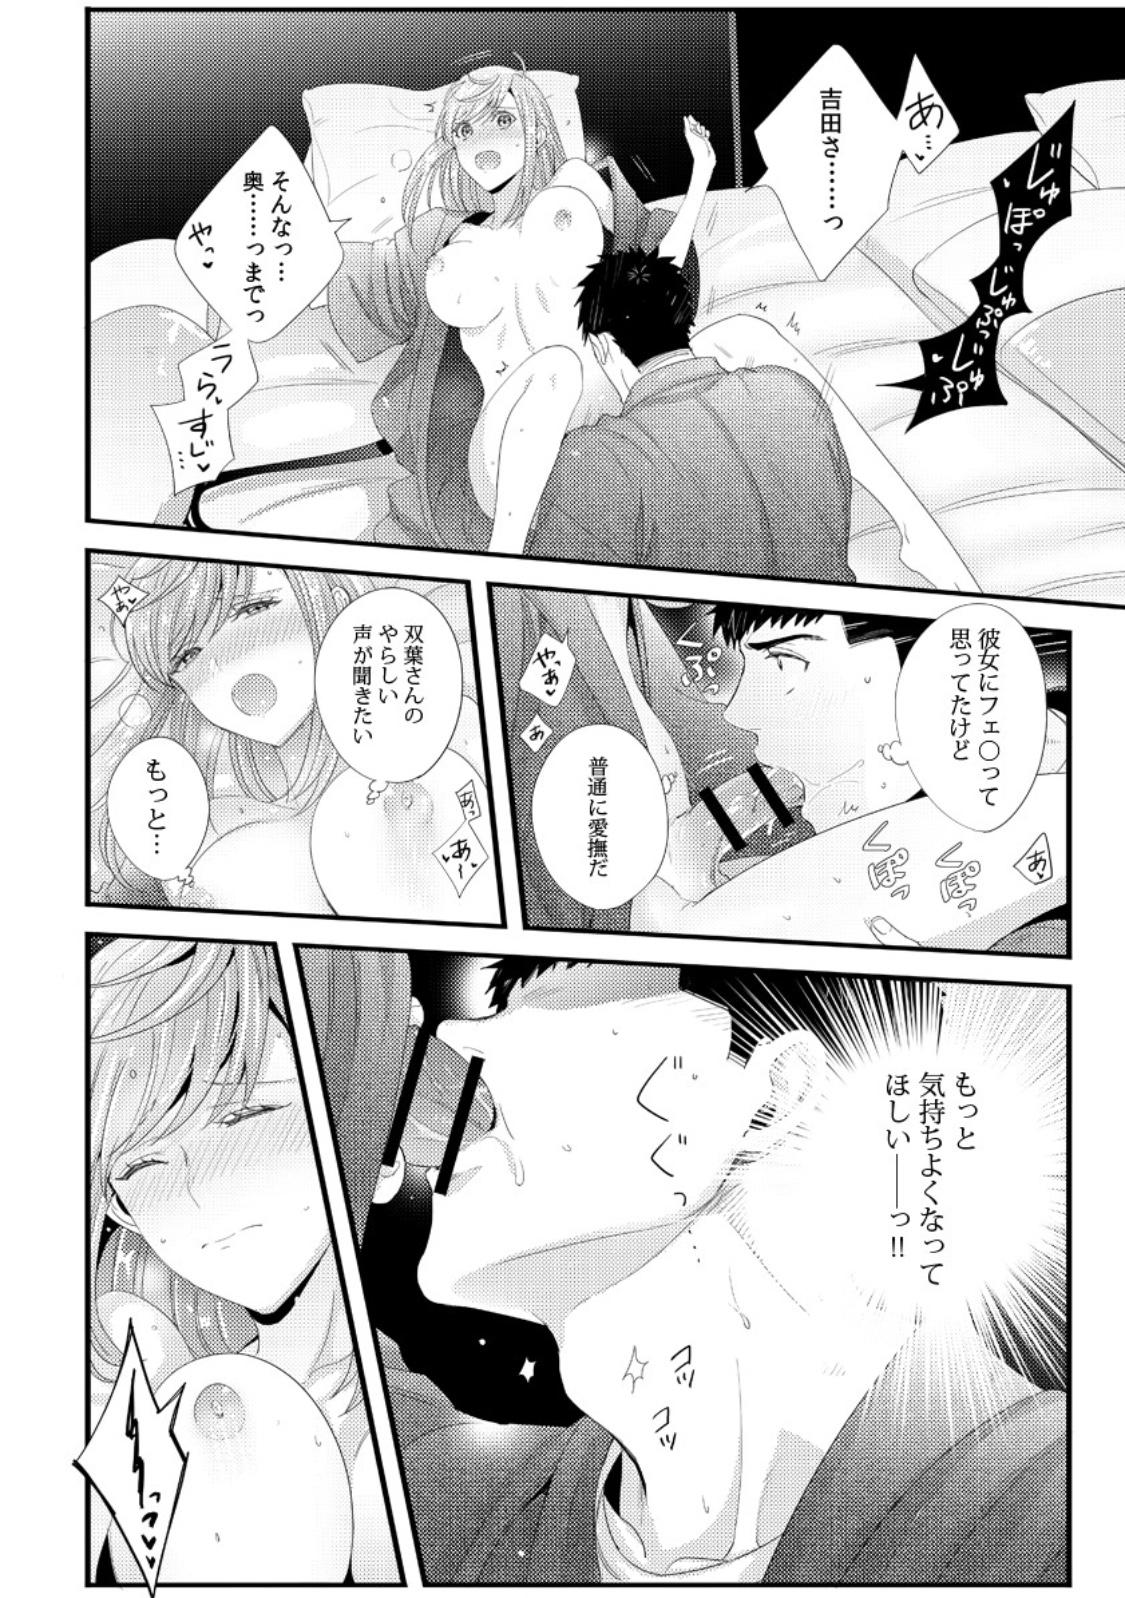 Please Let Me Hold You Futaba-San! Ch. 1-4 22